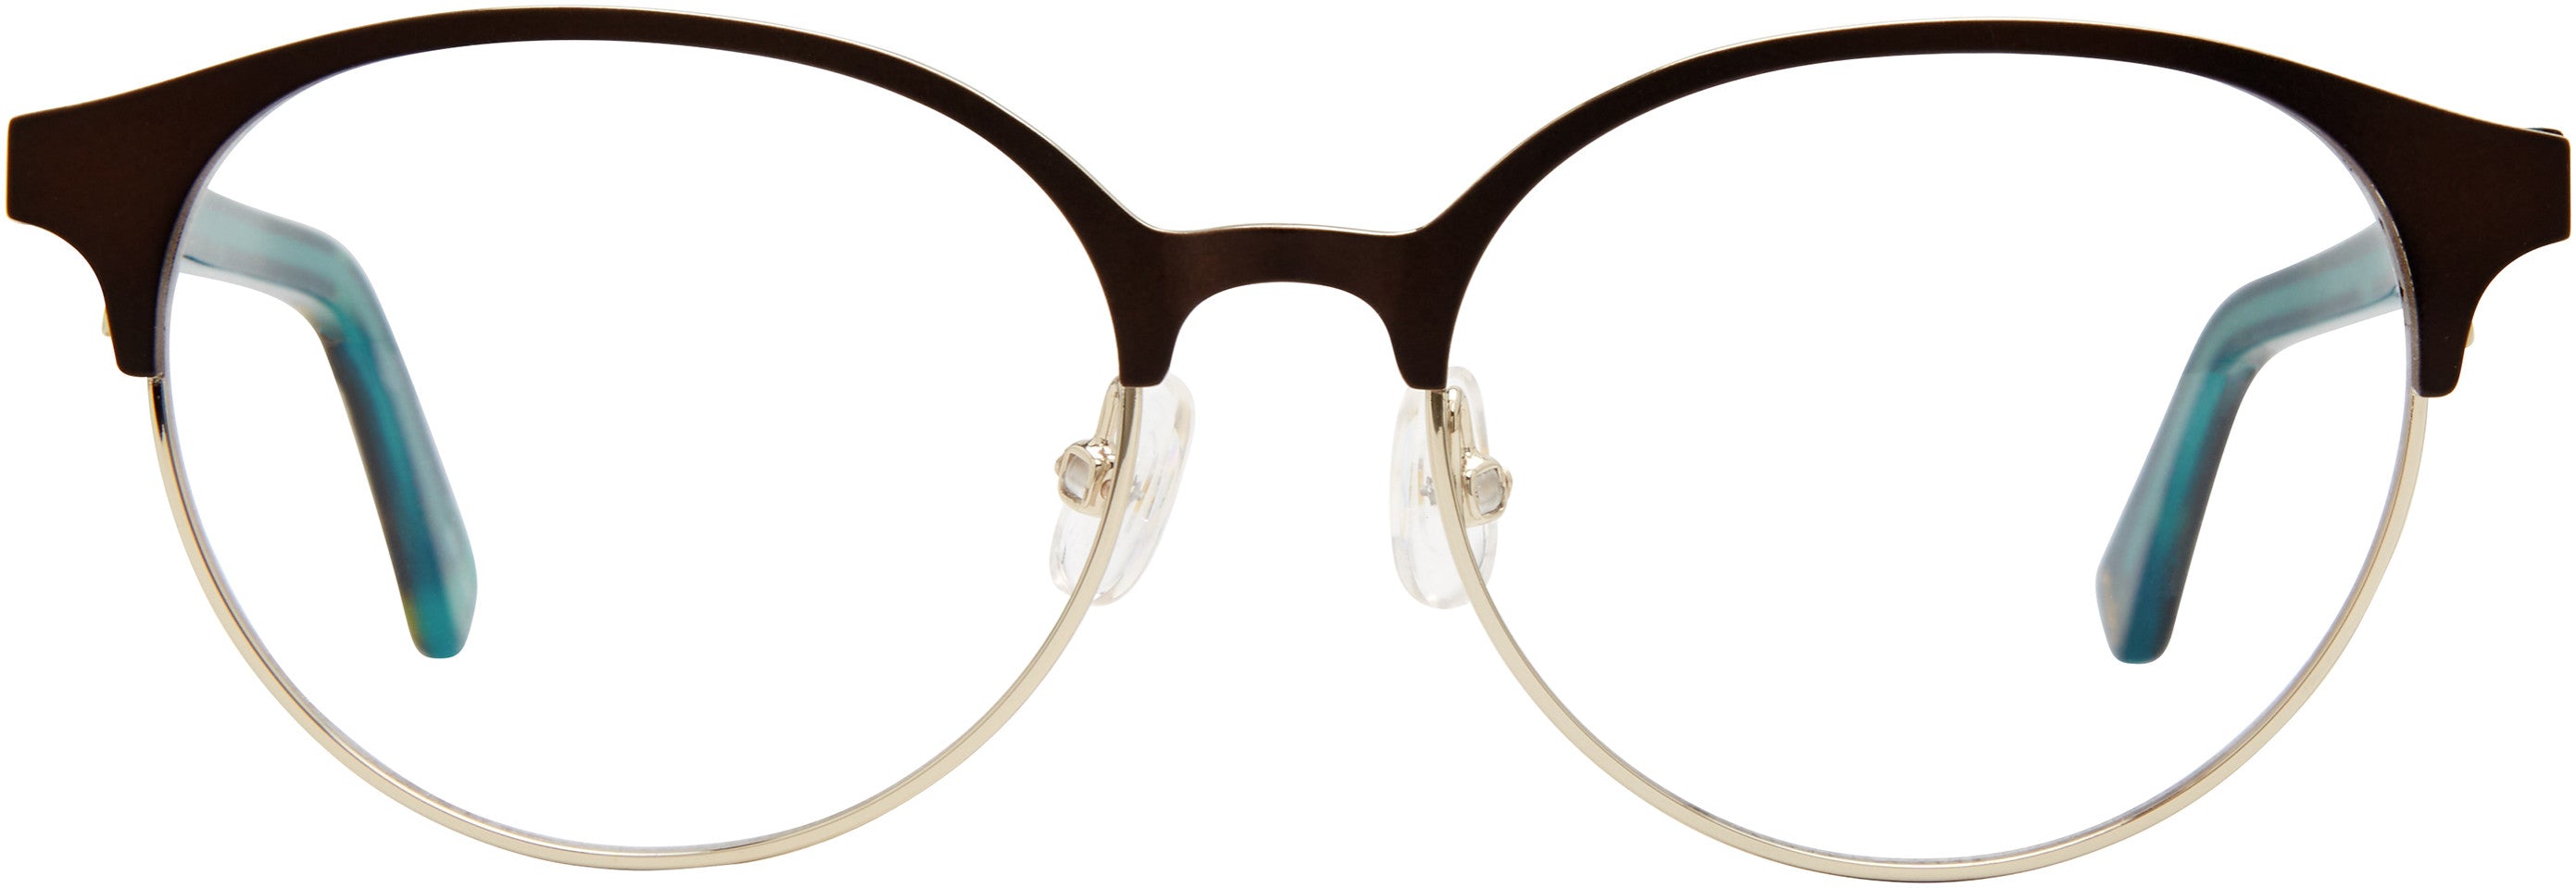 Juicy Couture Juicy 945 Oval Modified Eyeglasses 0YZ4-0YZ4  Matte Brown (00 Demo Lens)